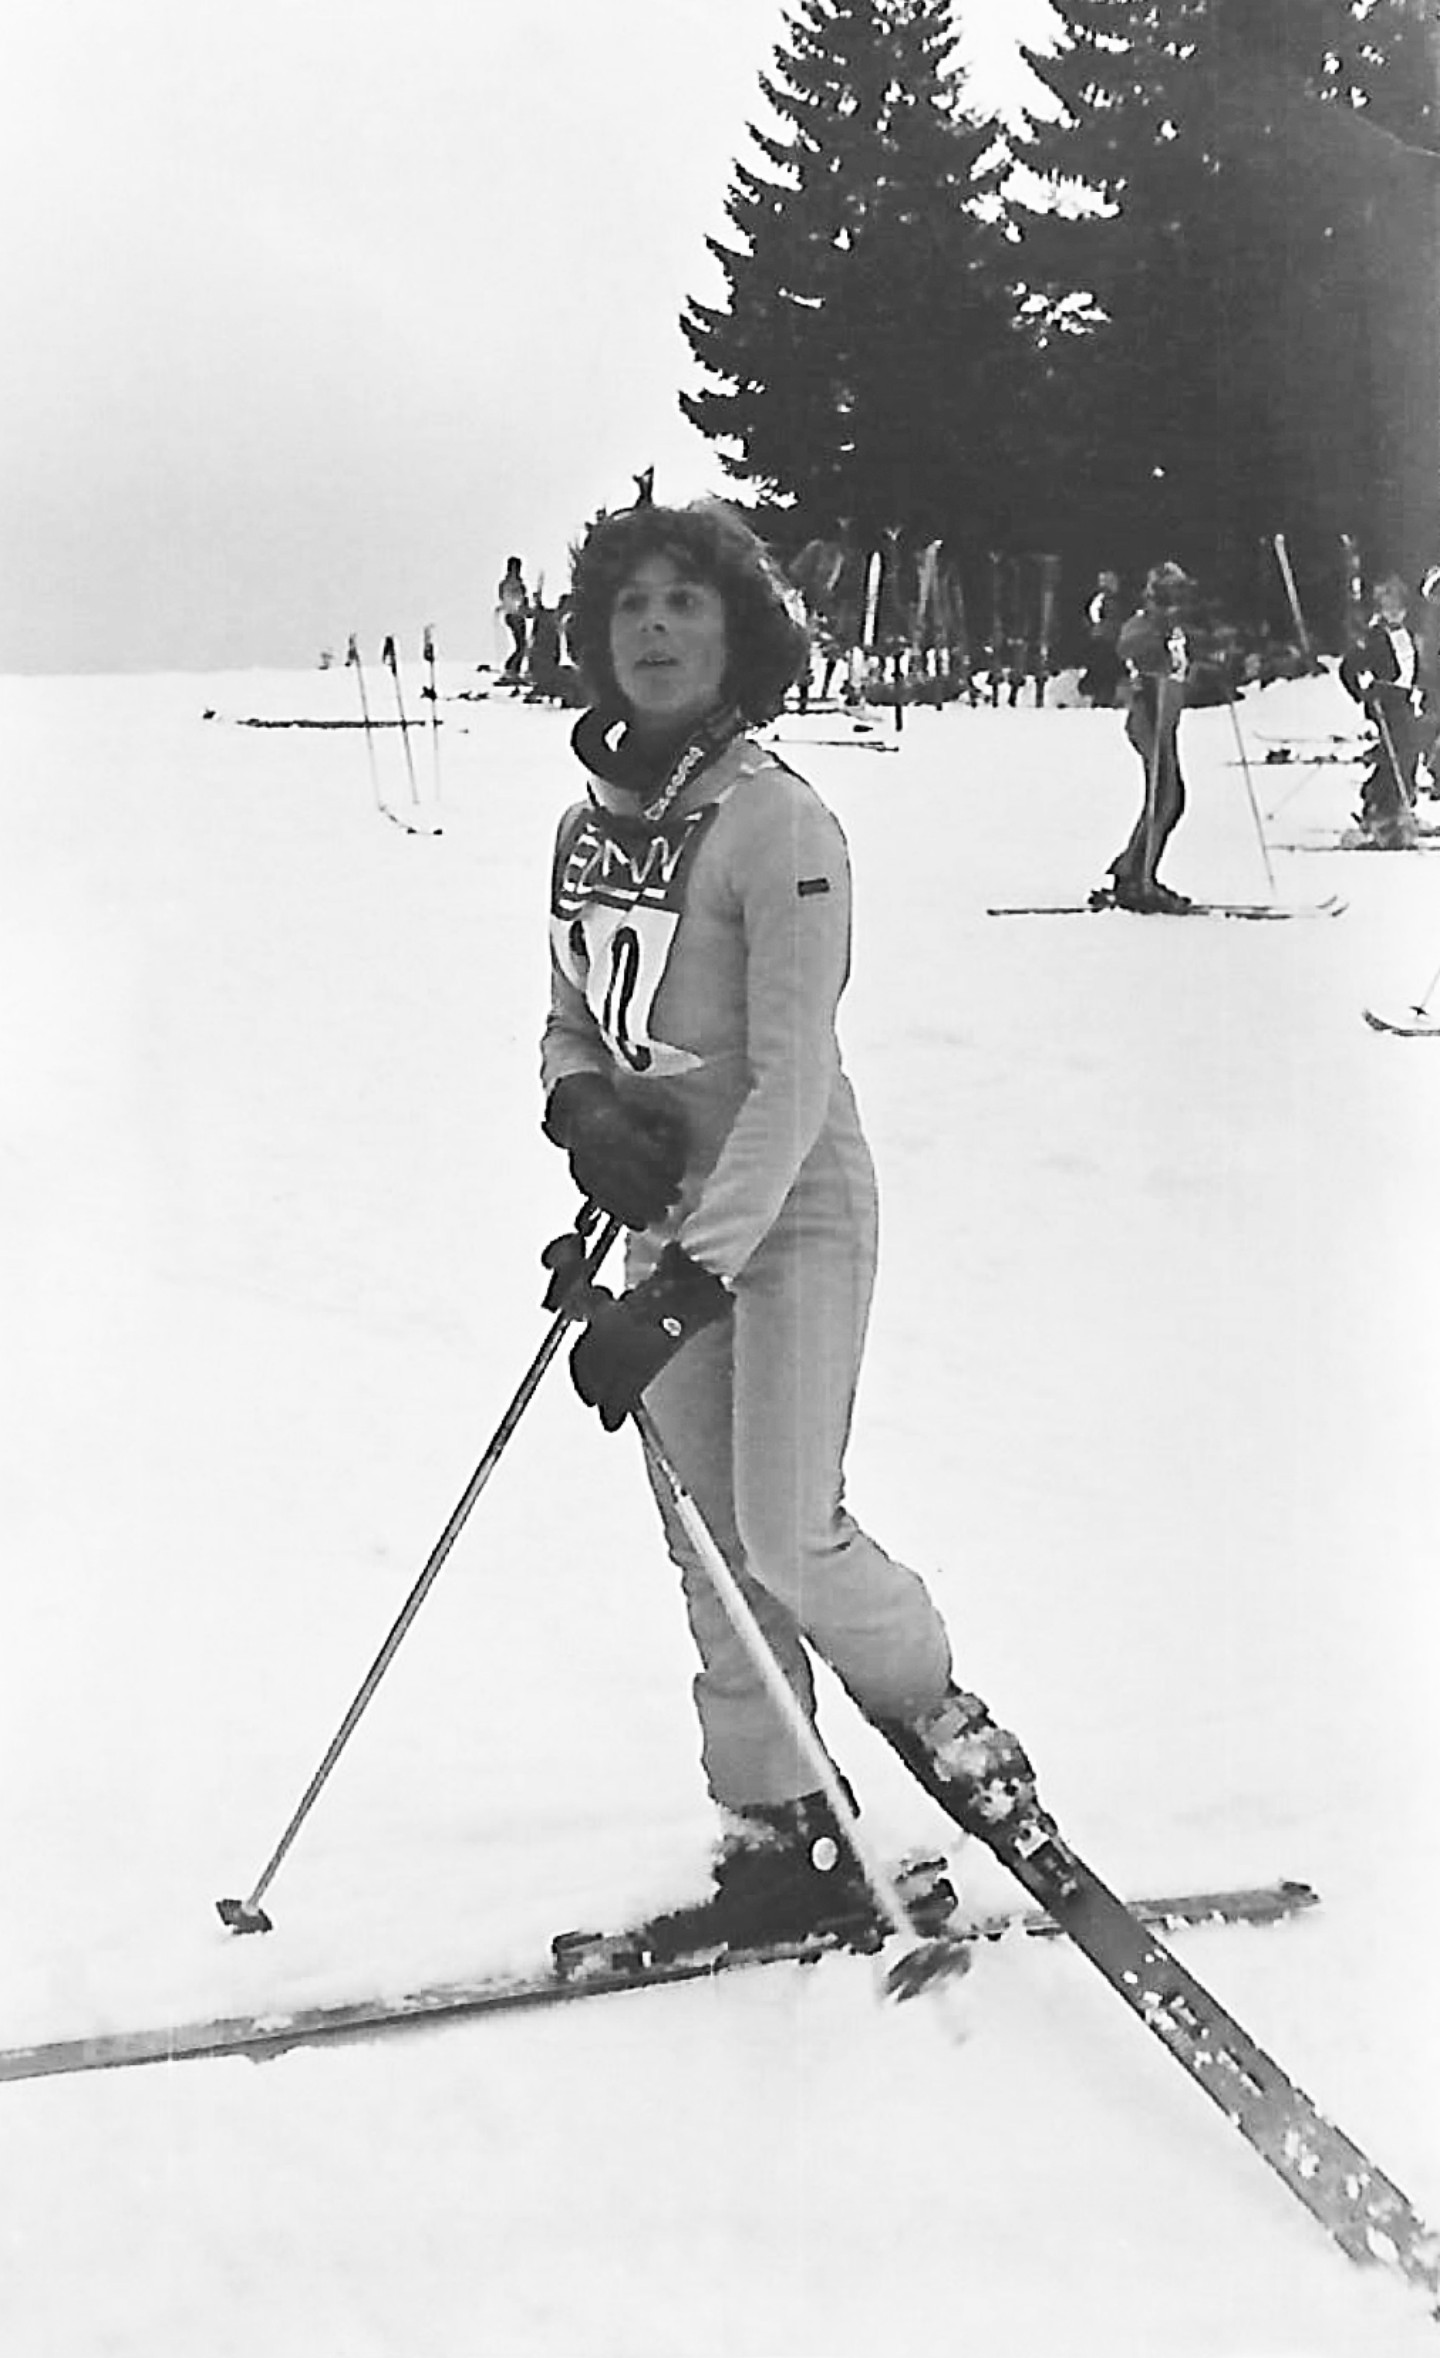 Ana Roš back when she was a champion skier. Image courtesy of the chef